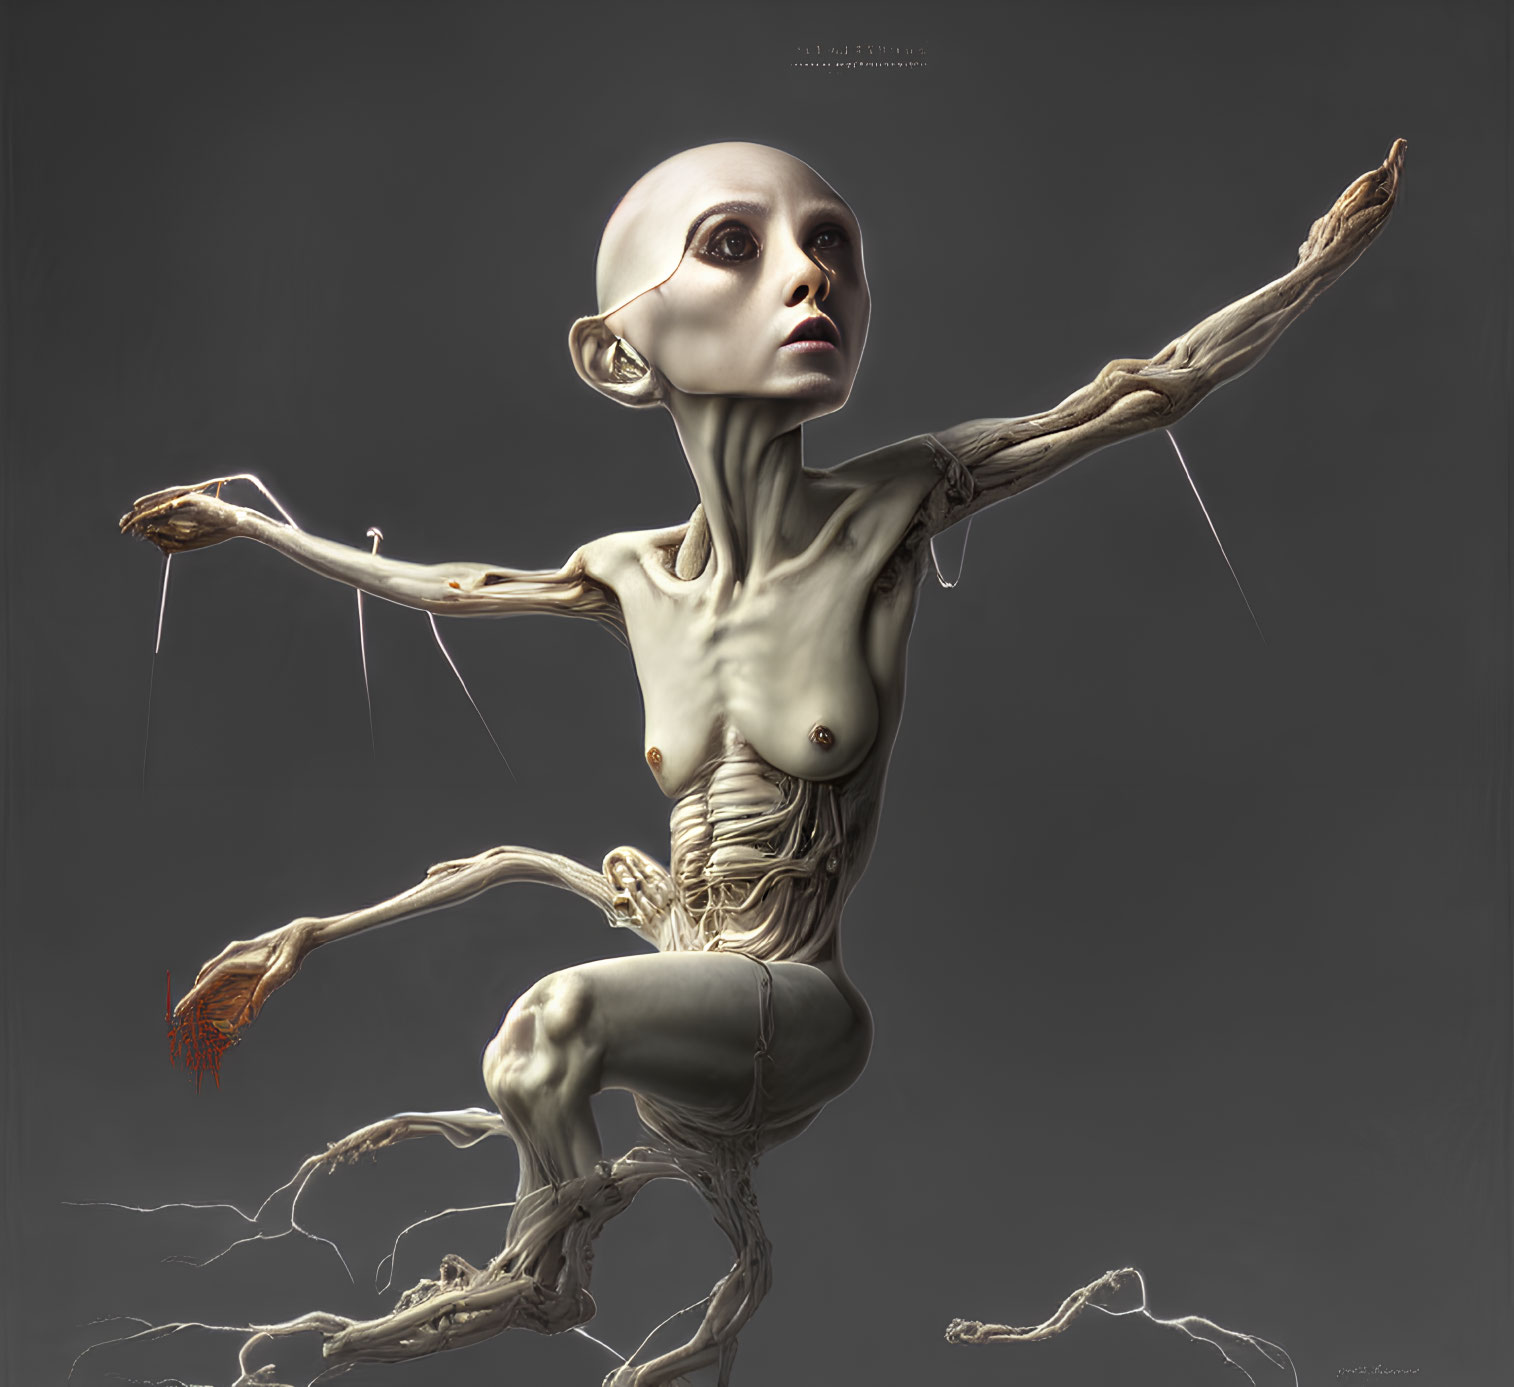 Surreal humanoid figure with elongated limbs and puppet-like strings on pale skin.